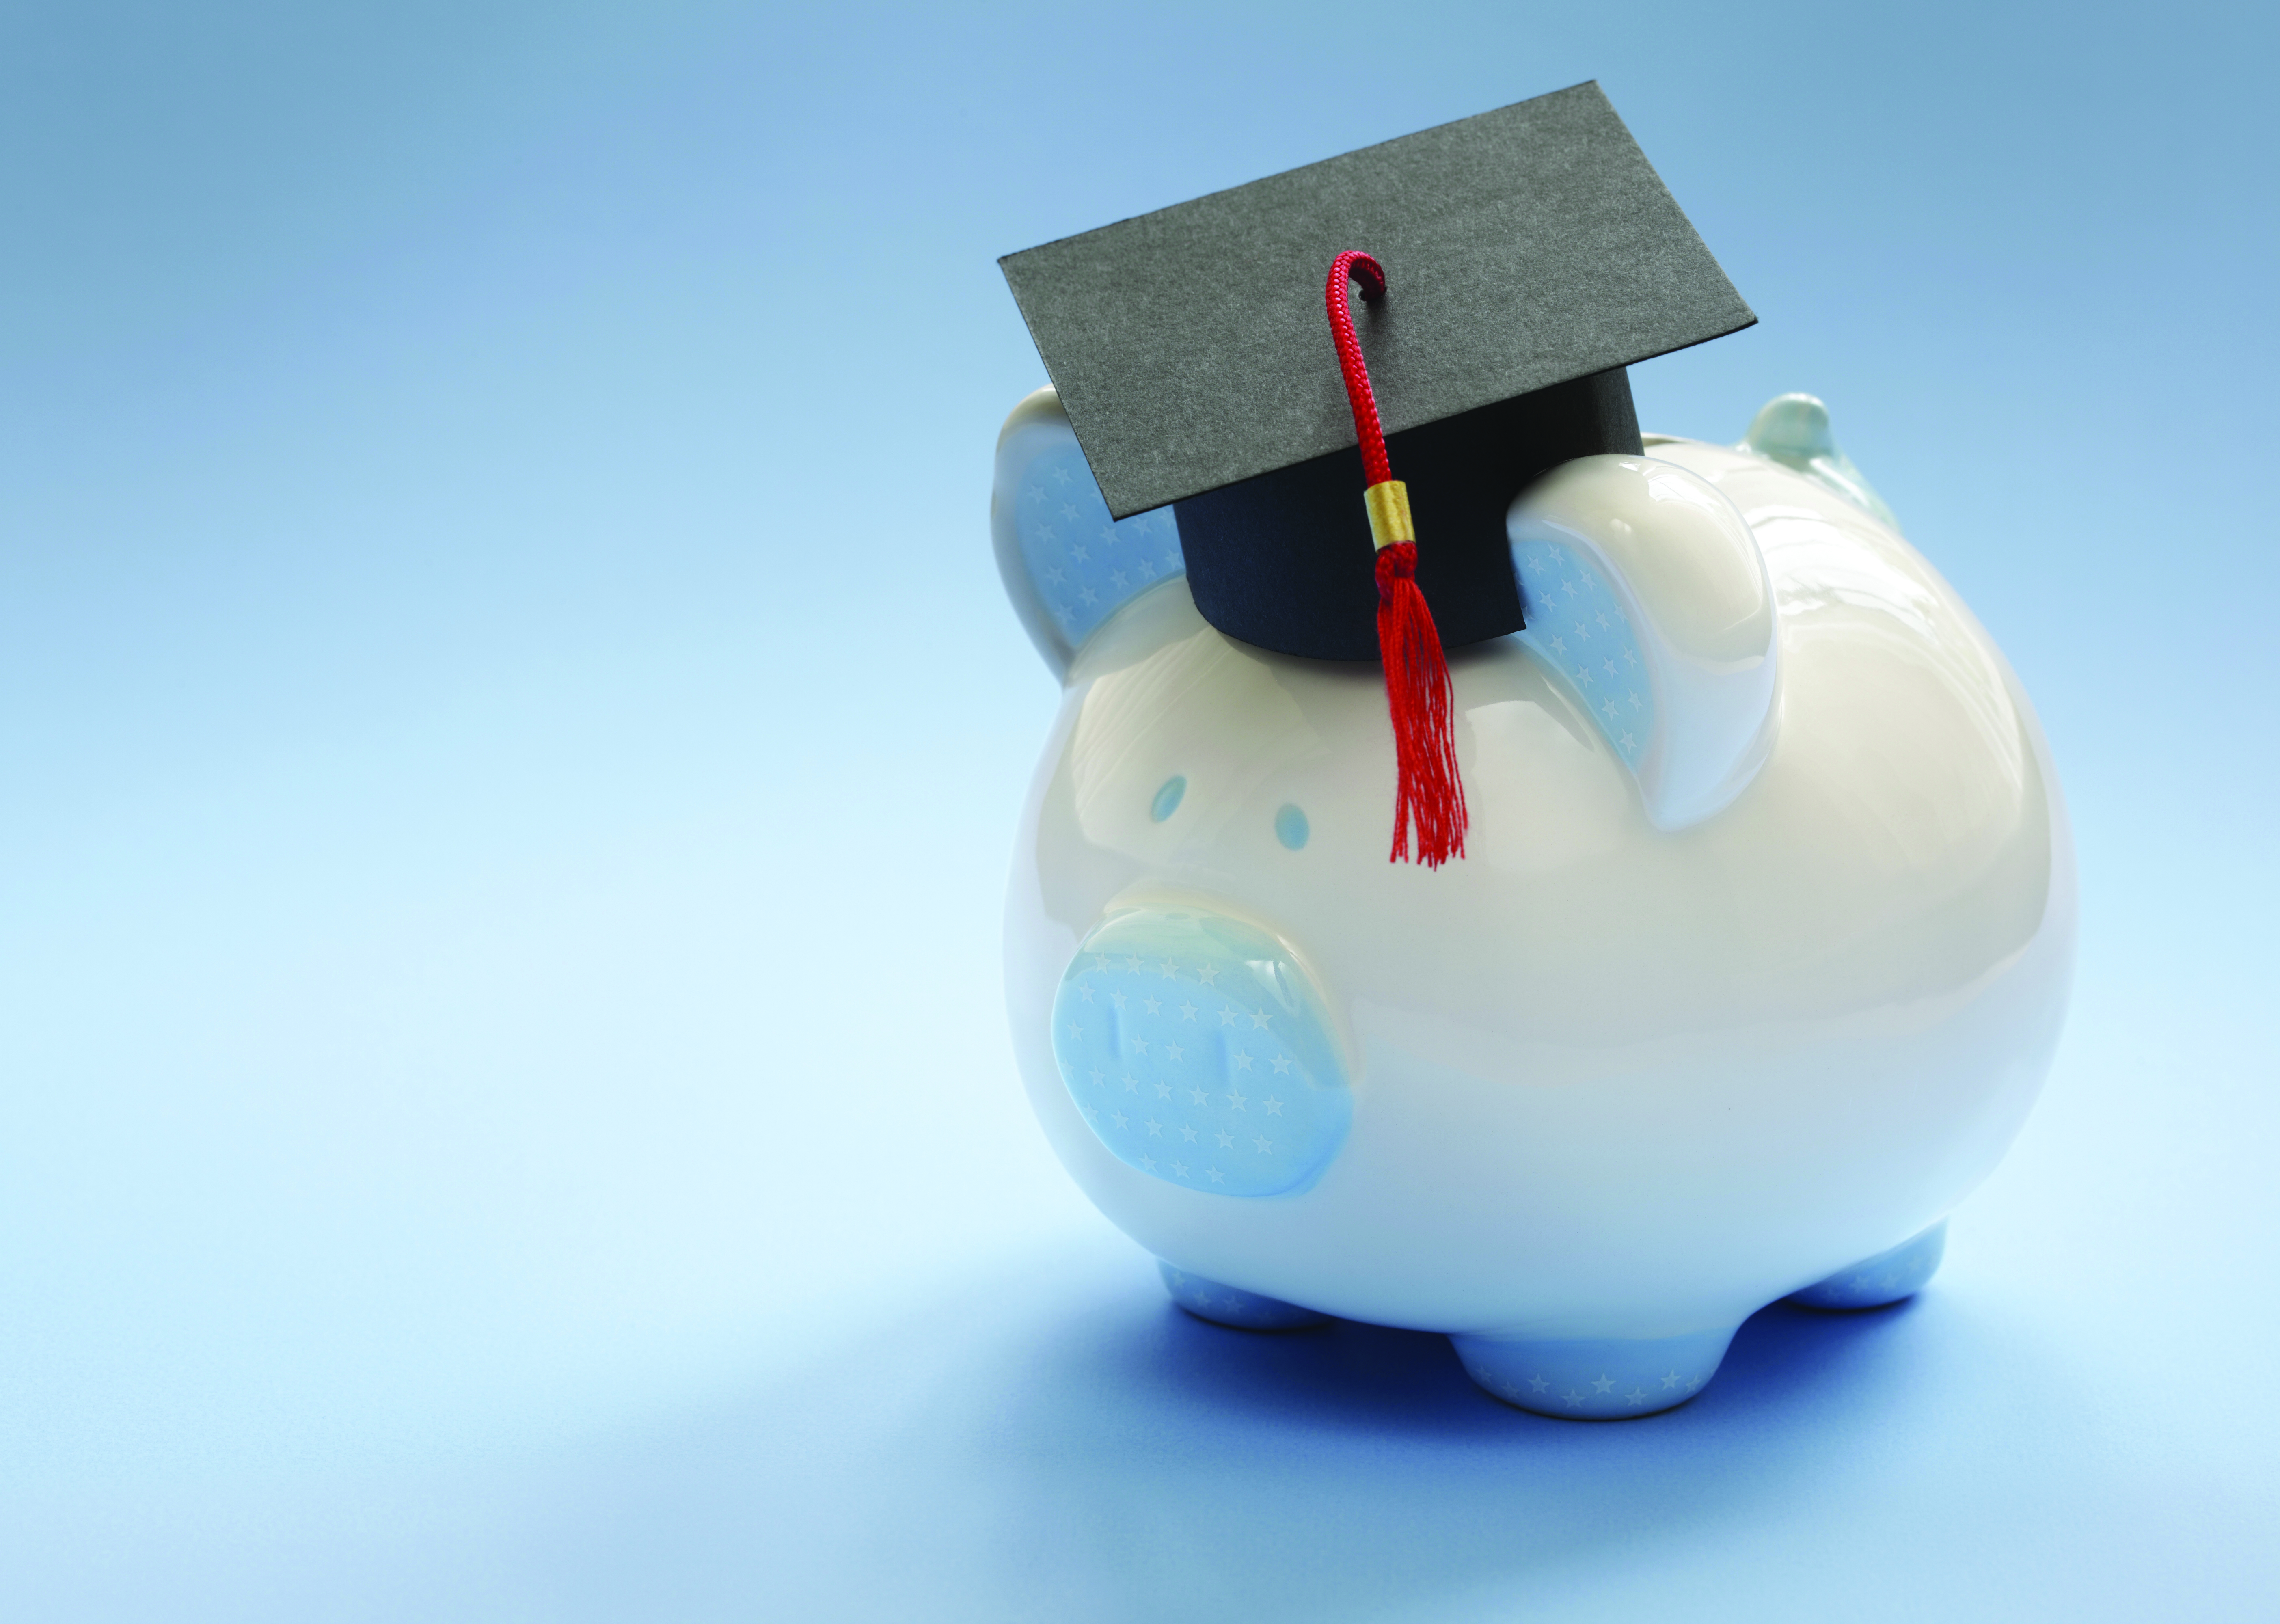 Piggy bank with mortar board hat on top